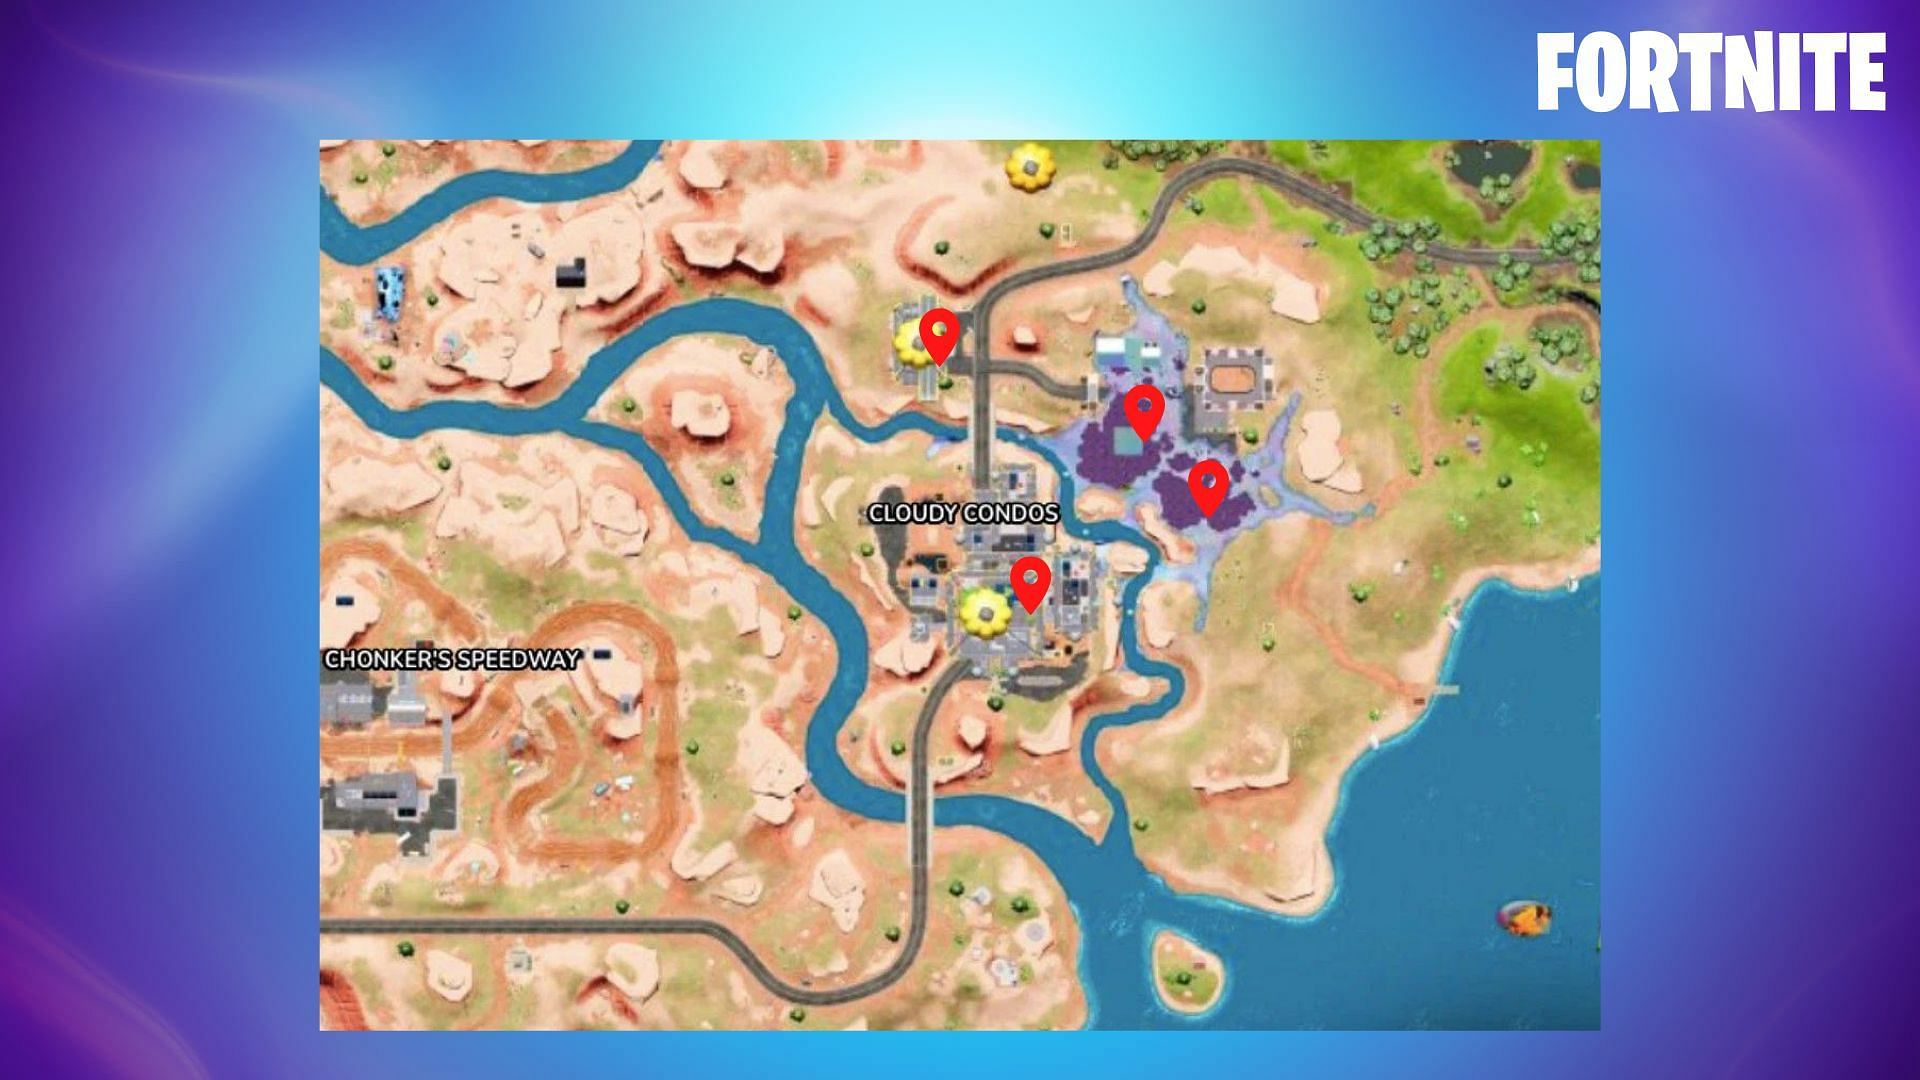 Land at the marked locations to get a guaranteed chest spawn in Fortnite Season 4 (Image via Sportskeeda)